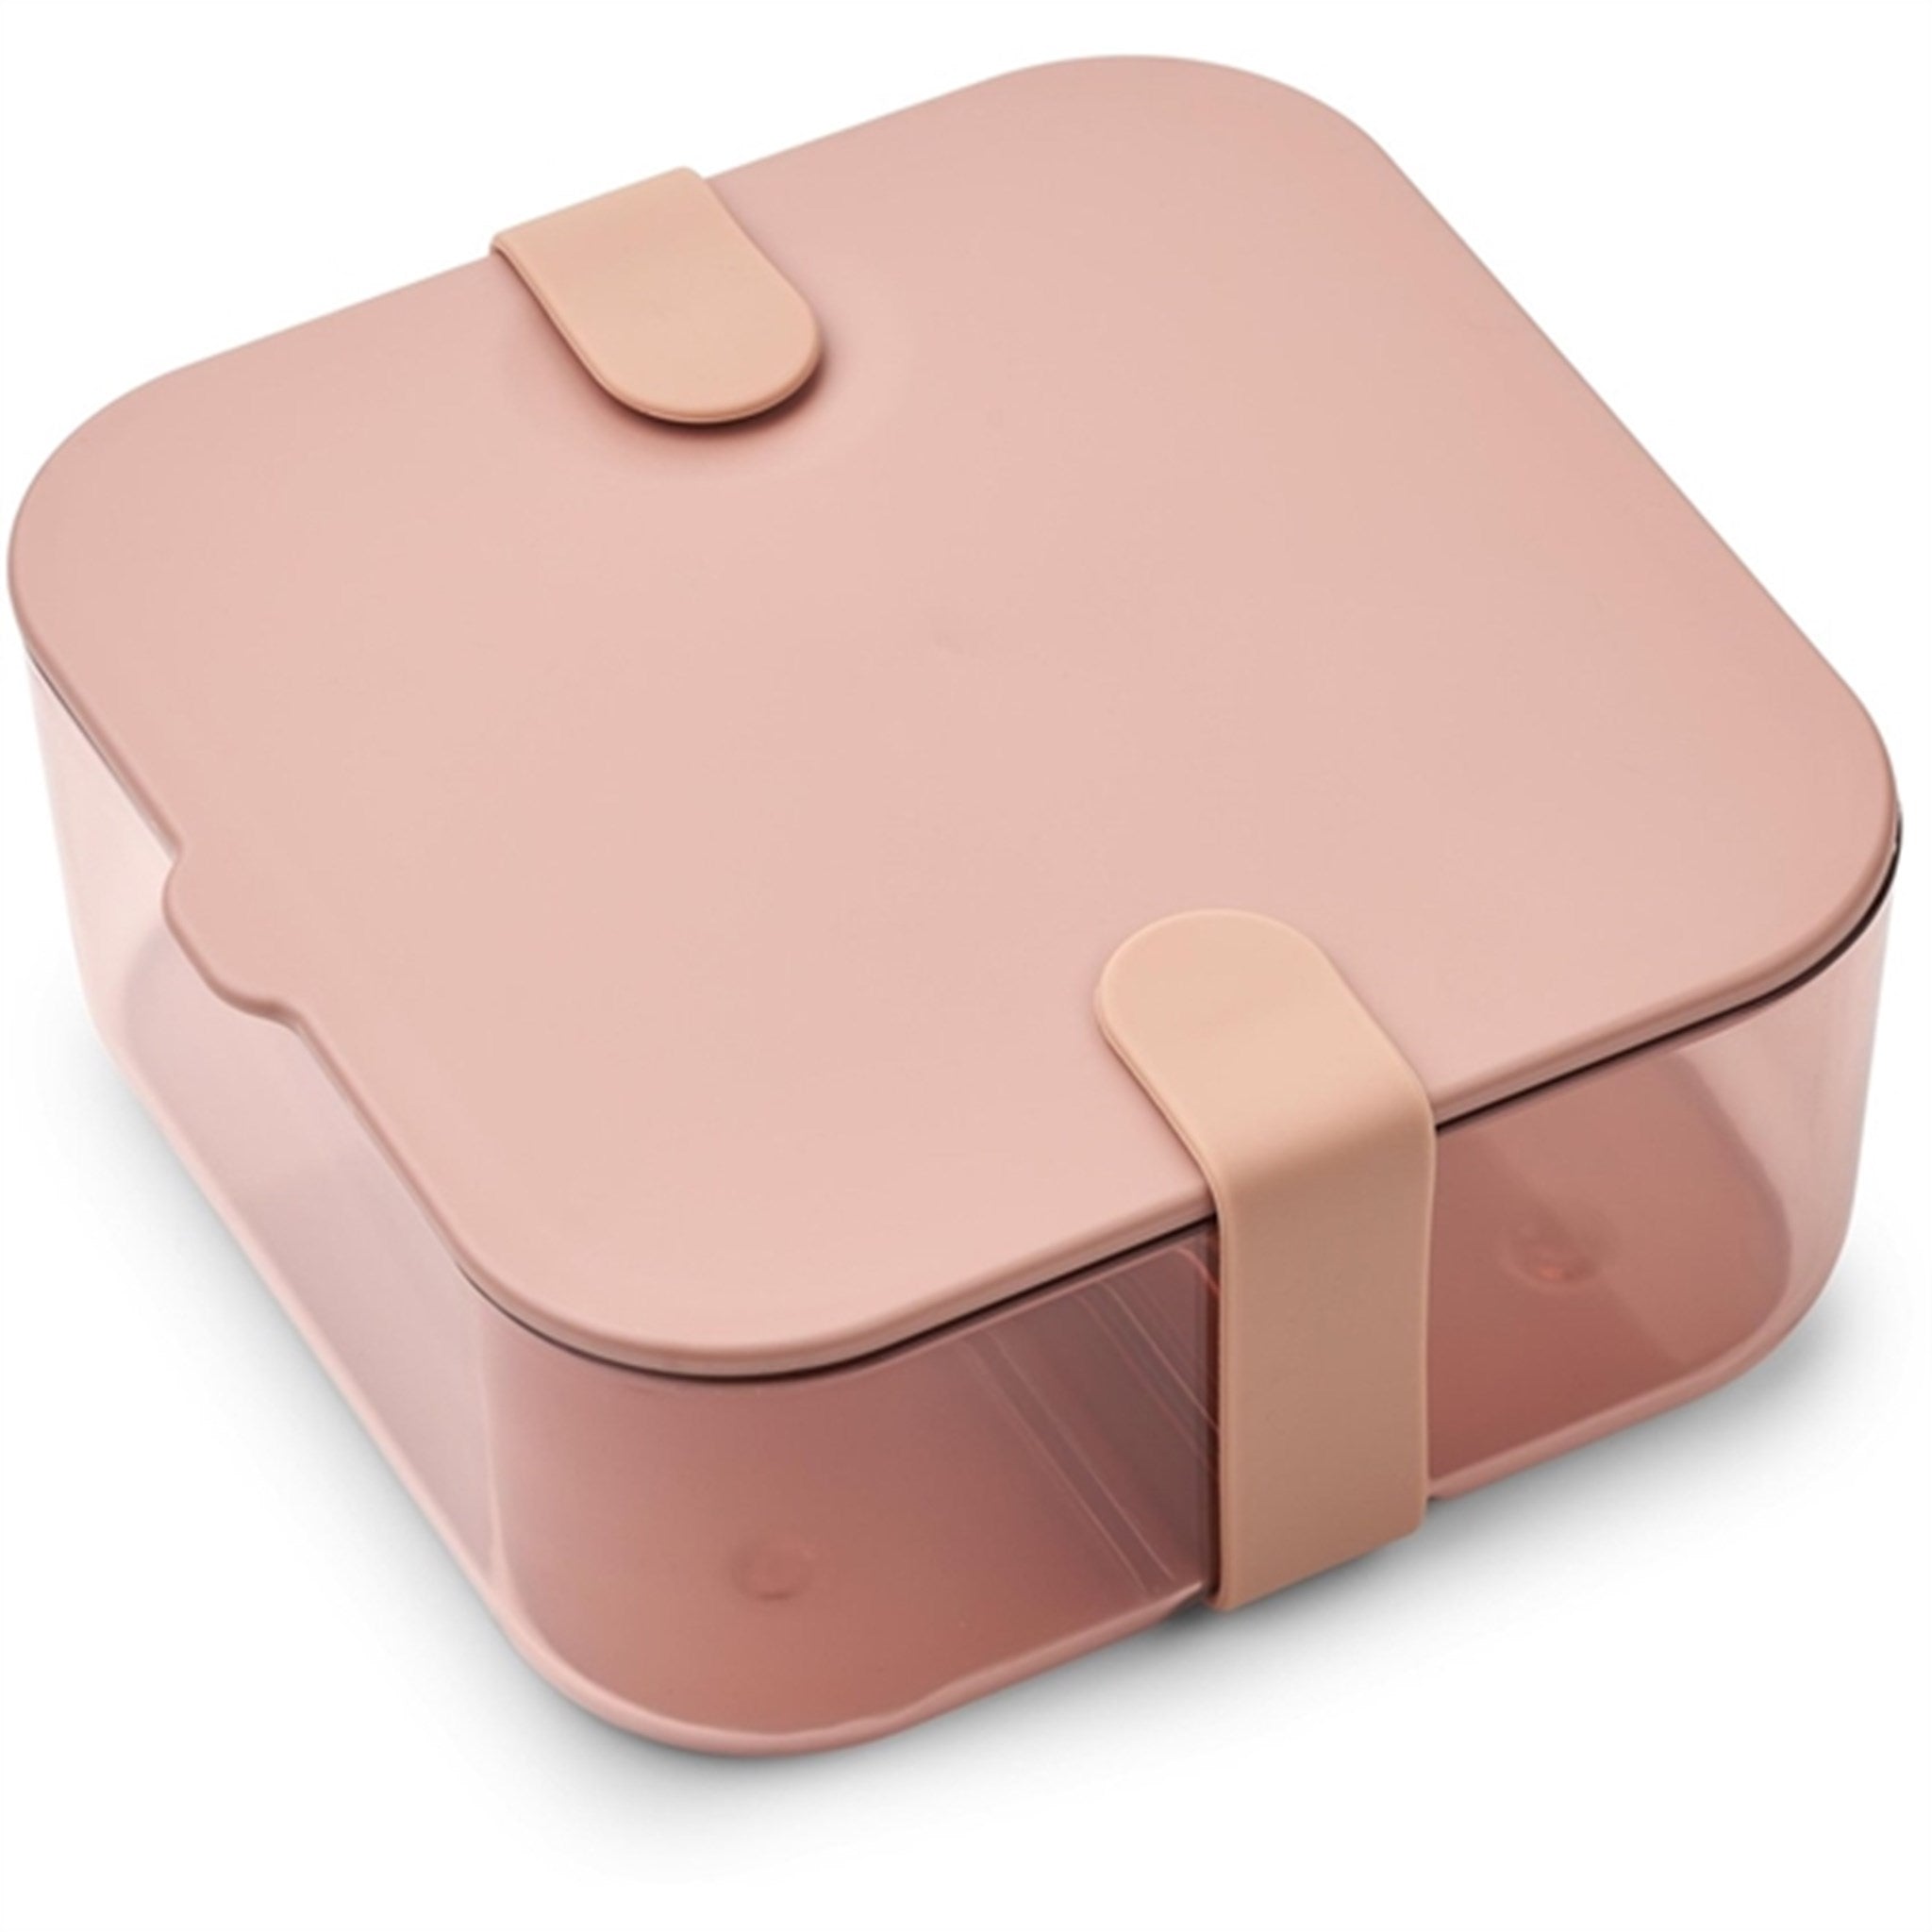 Liewood Carin Lunch Box Small Tuscany Rose/Dusty Raspberry